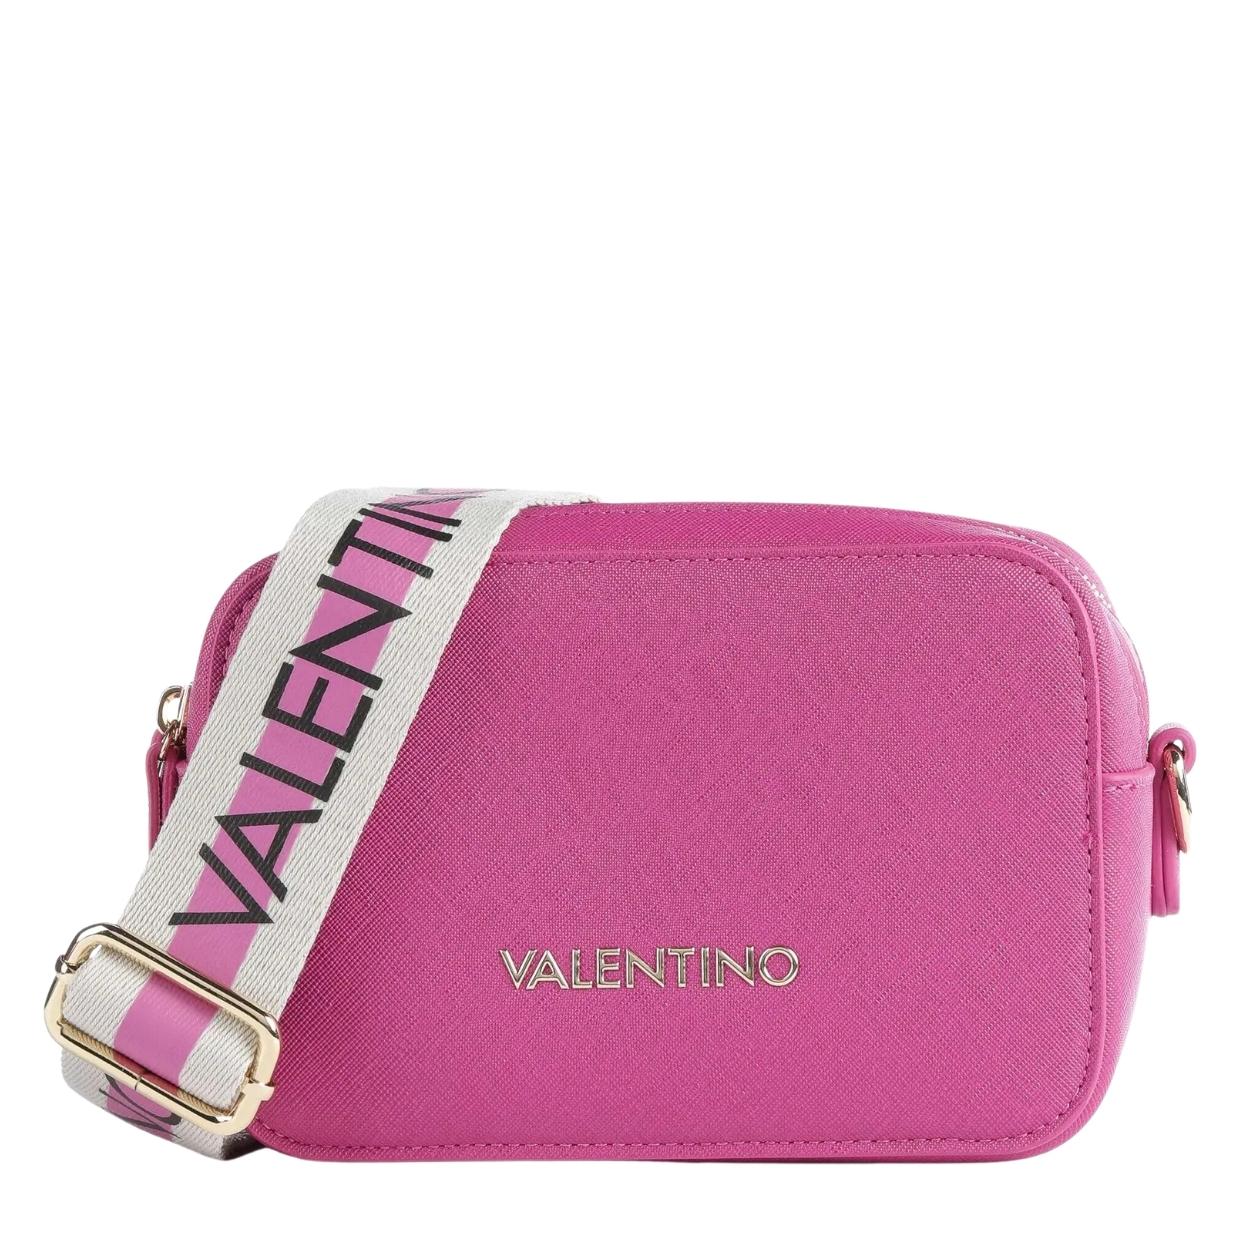 Valentino Zero Re Pink Small Hobo Shoulder Bag, pink : .co